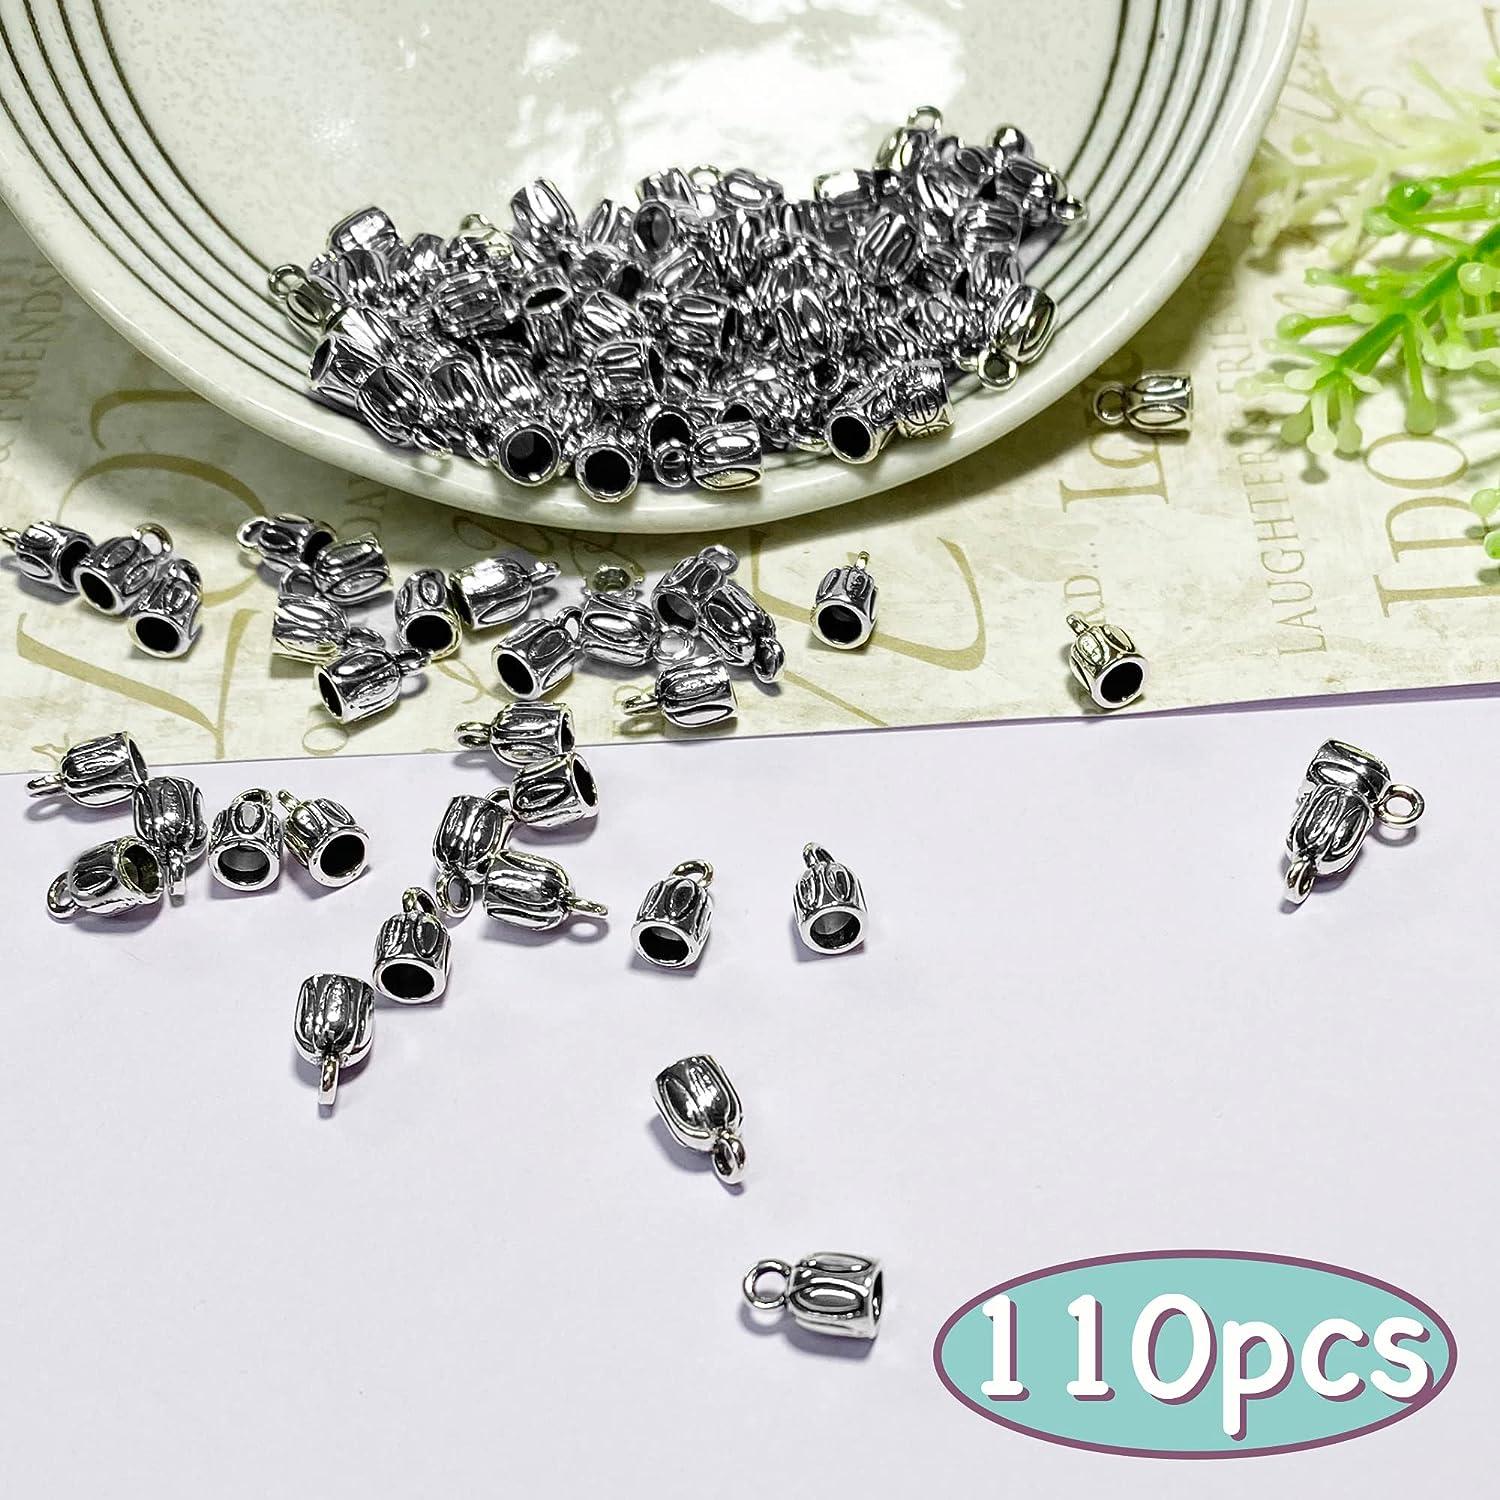 Heather's CF Silver Beads for Jewelry Making Supplies Bracelet Necklace Jewelry Accessories Beading Kit 260 Pieces Crafting